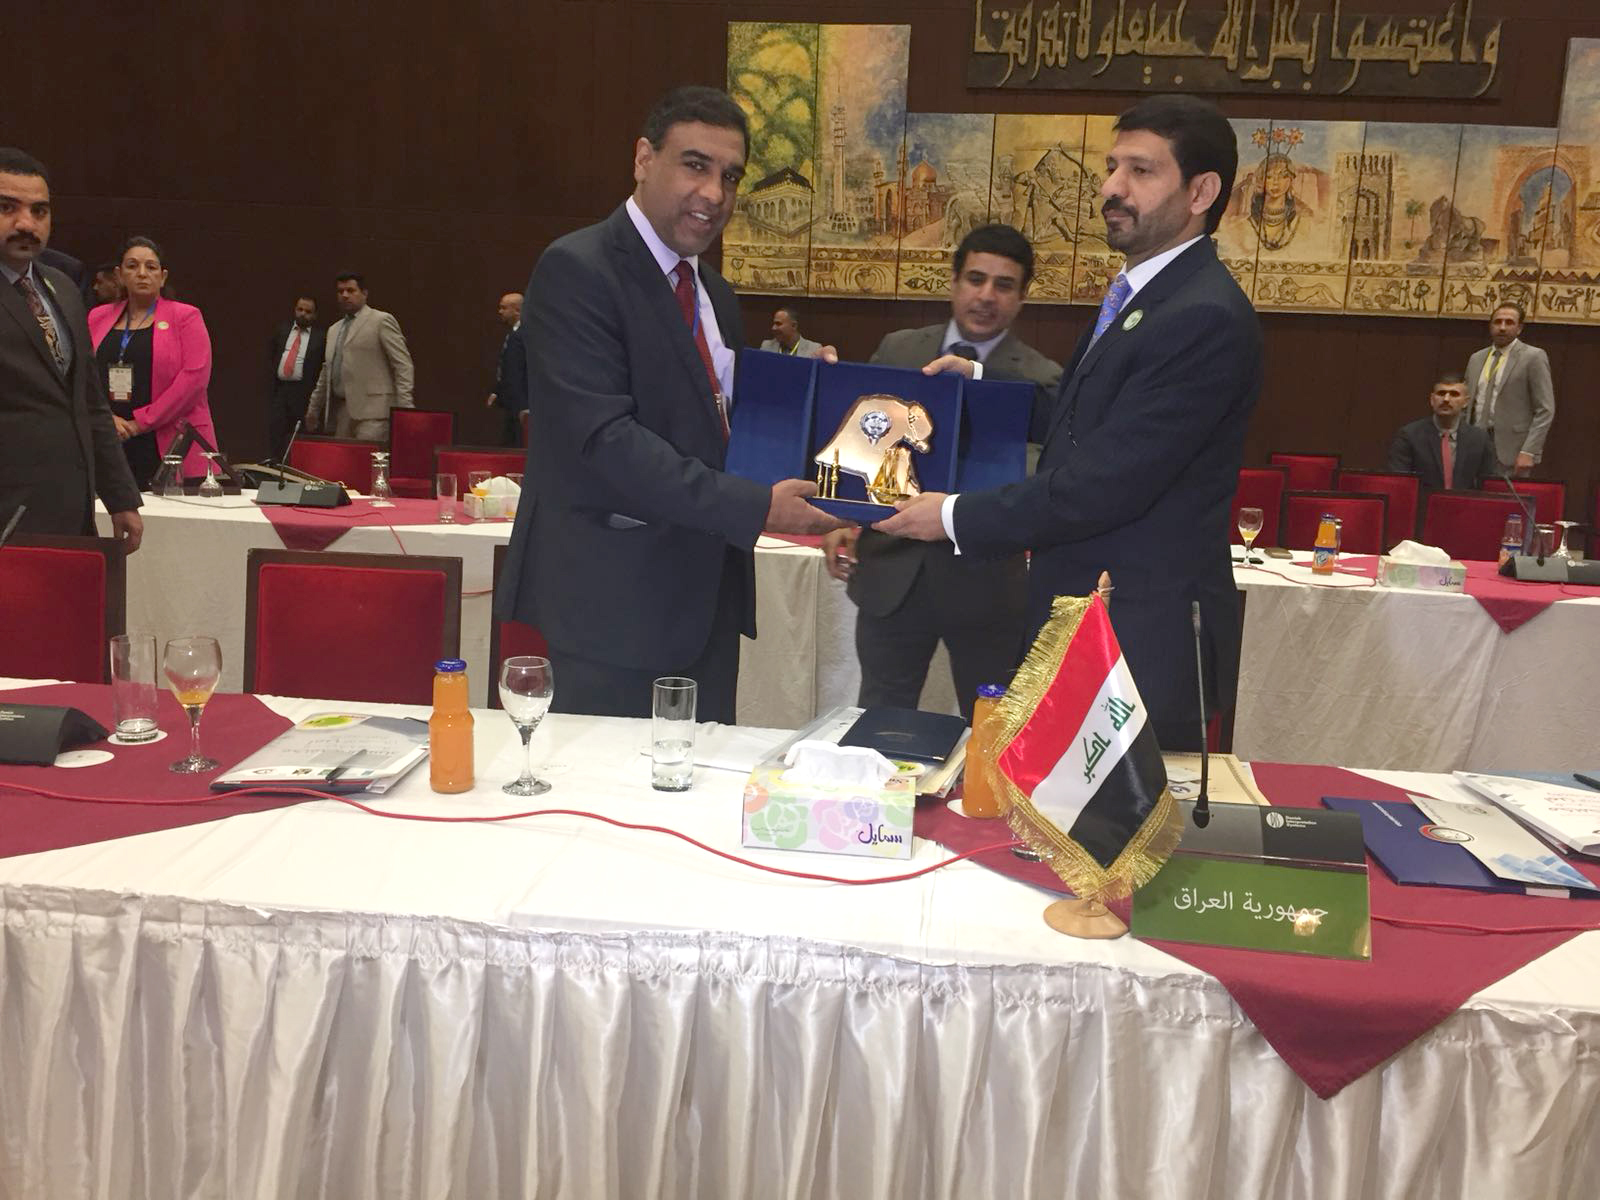 Chairman of the Kuwait Anti-Corruption Authority (Nazaha) Abdulrahman Al-Nemash during the 6th Ministerial Conference of the Arab Network for the Promotion of Integrity and Combating Corruption in Baghdad